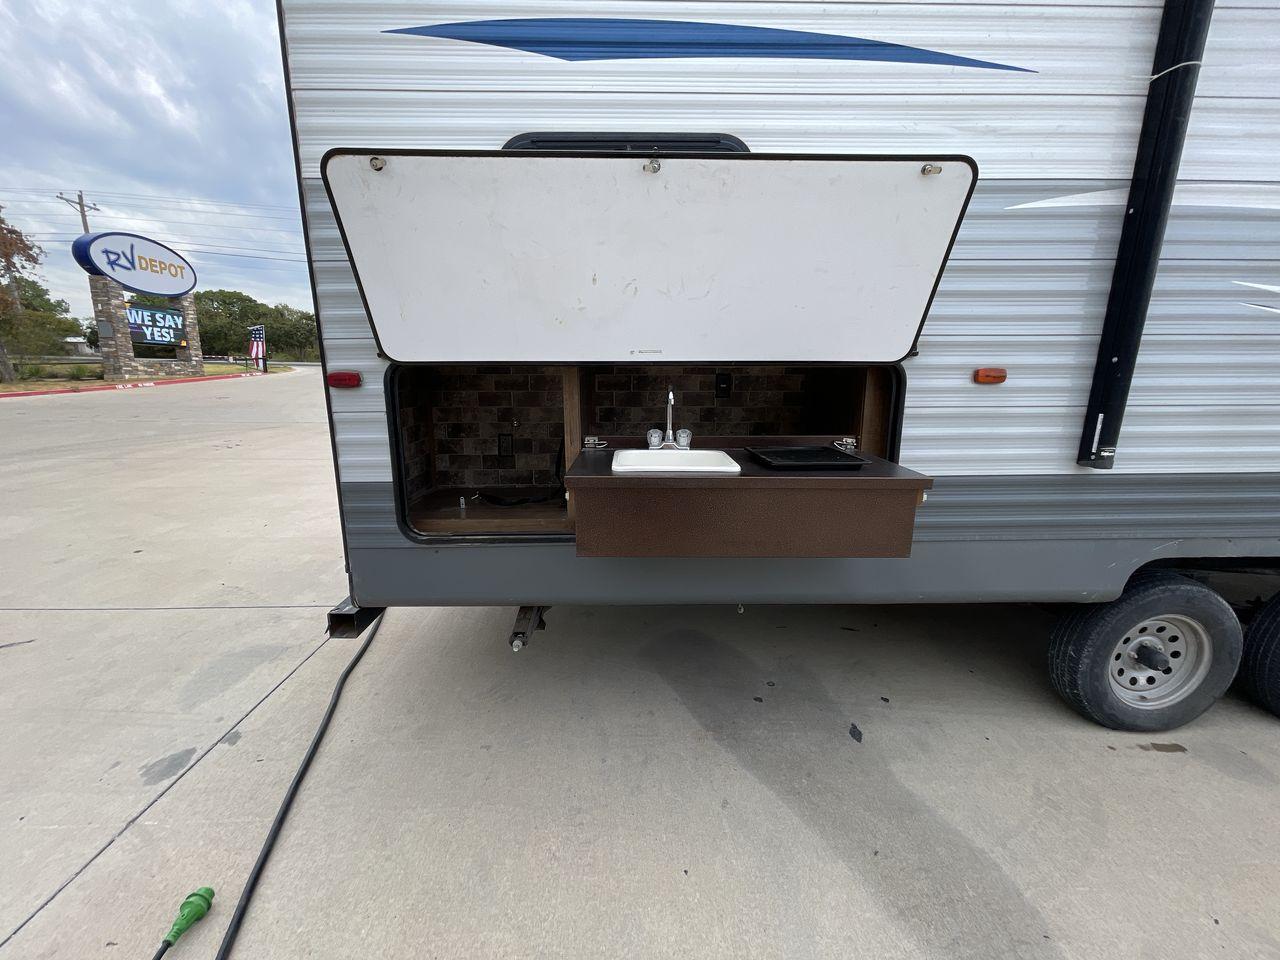 2018 GRAY KINGSPORT 301TB (1NL1GTS2XJ1) , Length: 33.58 ft. | Dry Weight: 6,845 lbs. | Slides: 1 transmission, located at 4319 N Main Street, Cleburne, TX, 76033, (817) 221-0660, 32.435829, -97.384178 - The 2018 Kingsport 301TB travel trailer will help you prepare for your next vacation. This well-thought-out, kid-friendly RV is your ticket to enjoyable and unique camping trips. The dimensions of this unit are 34.08 ft in length, 8 ft in width, and 10.75 ft in height. It has a dry weight of 6,845 l - Photo #20